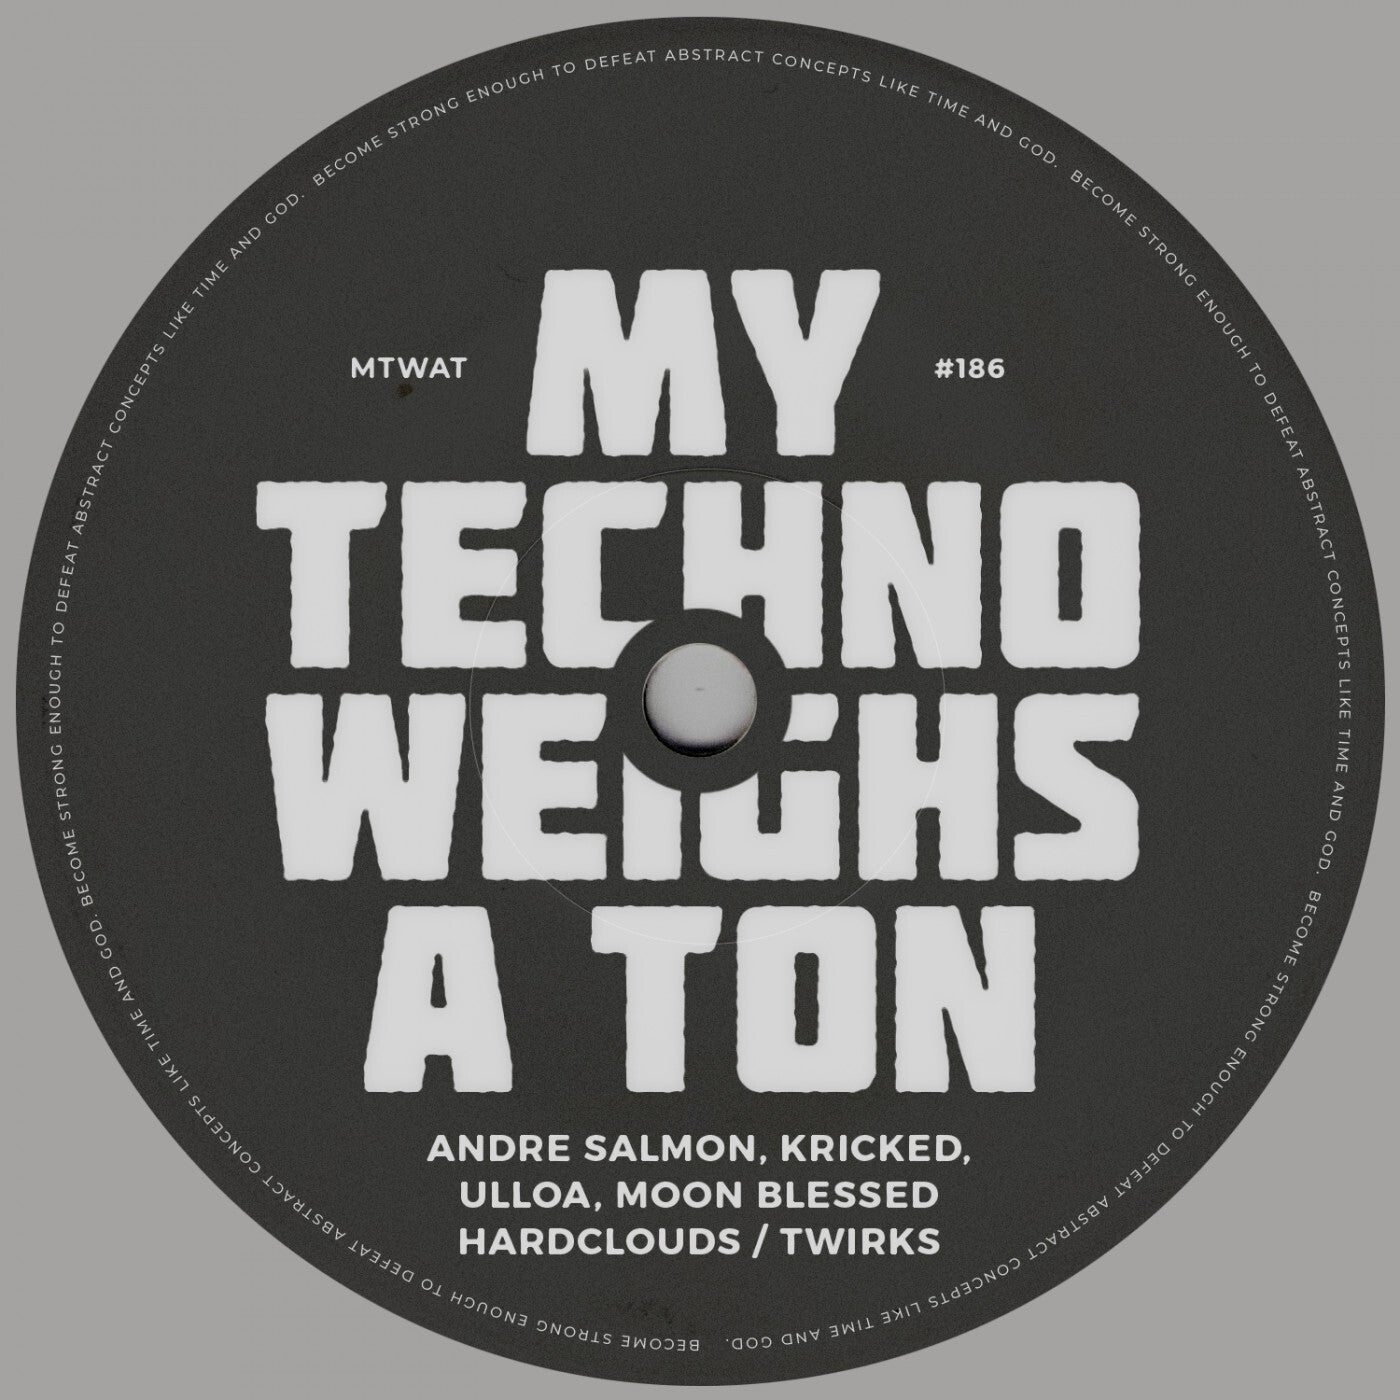 Andre Salmon, Kricked, Ulloa, Moon Blessed – Hardclouds / Twirks [MTWAT186]